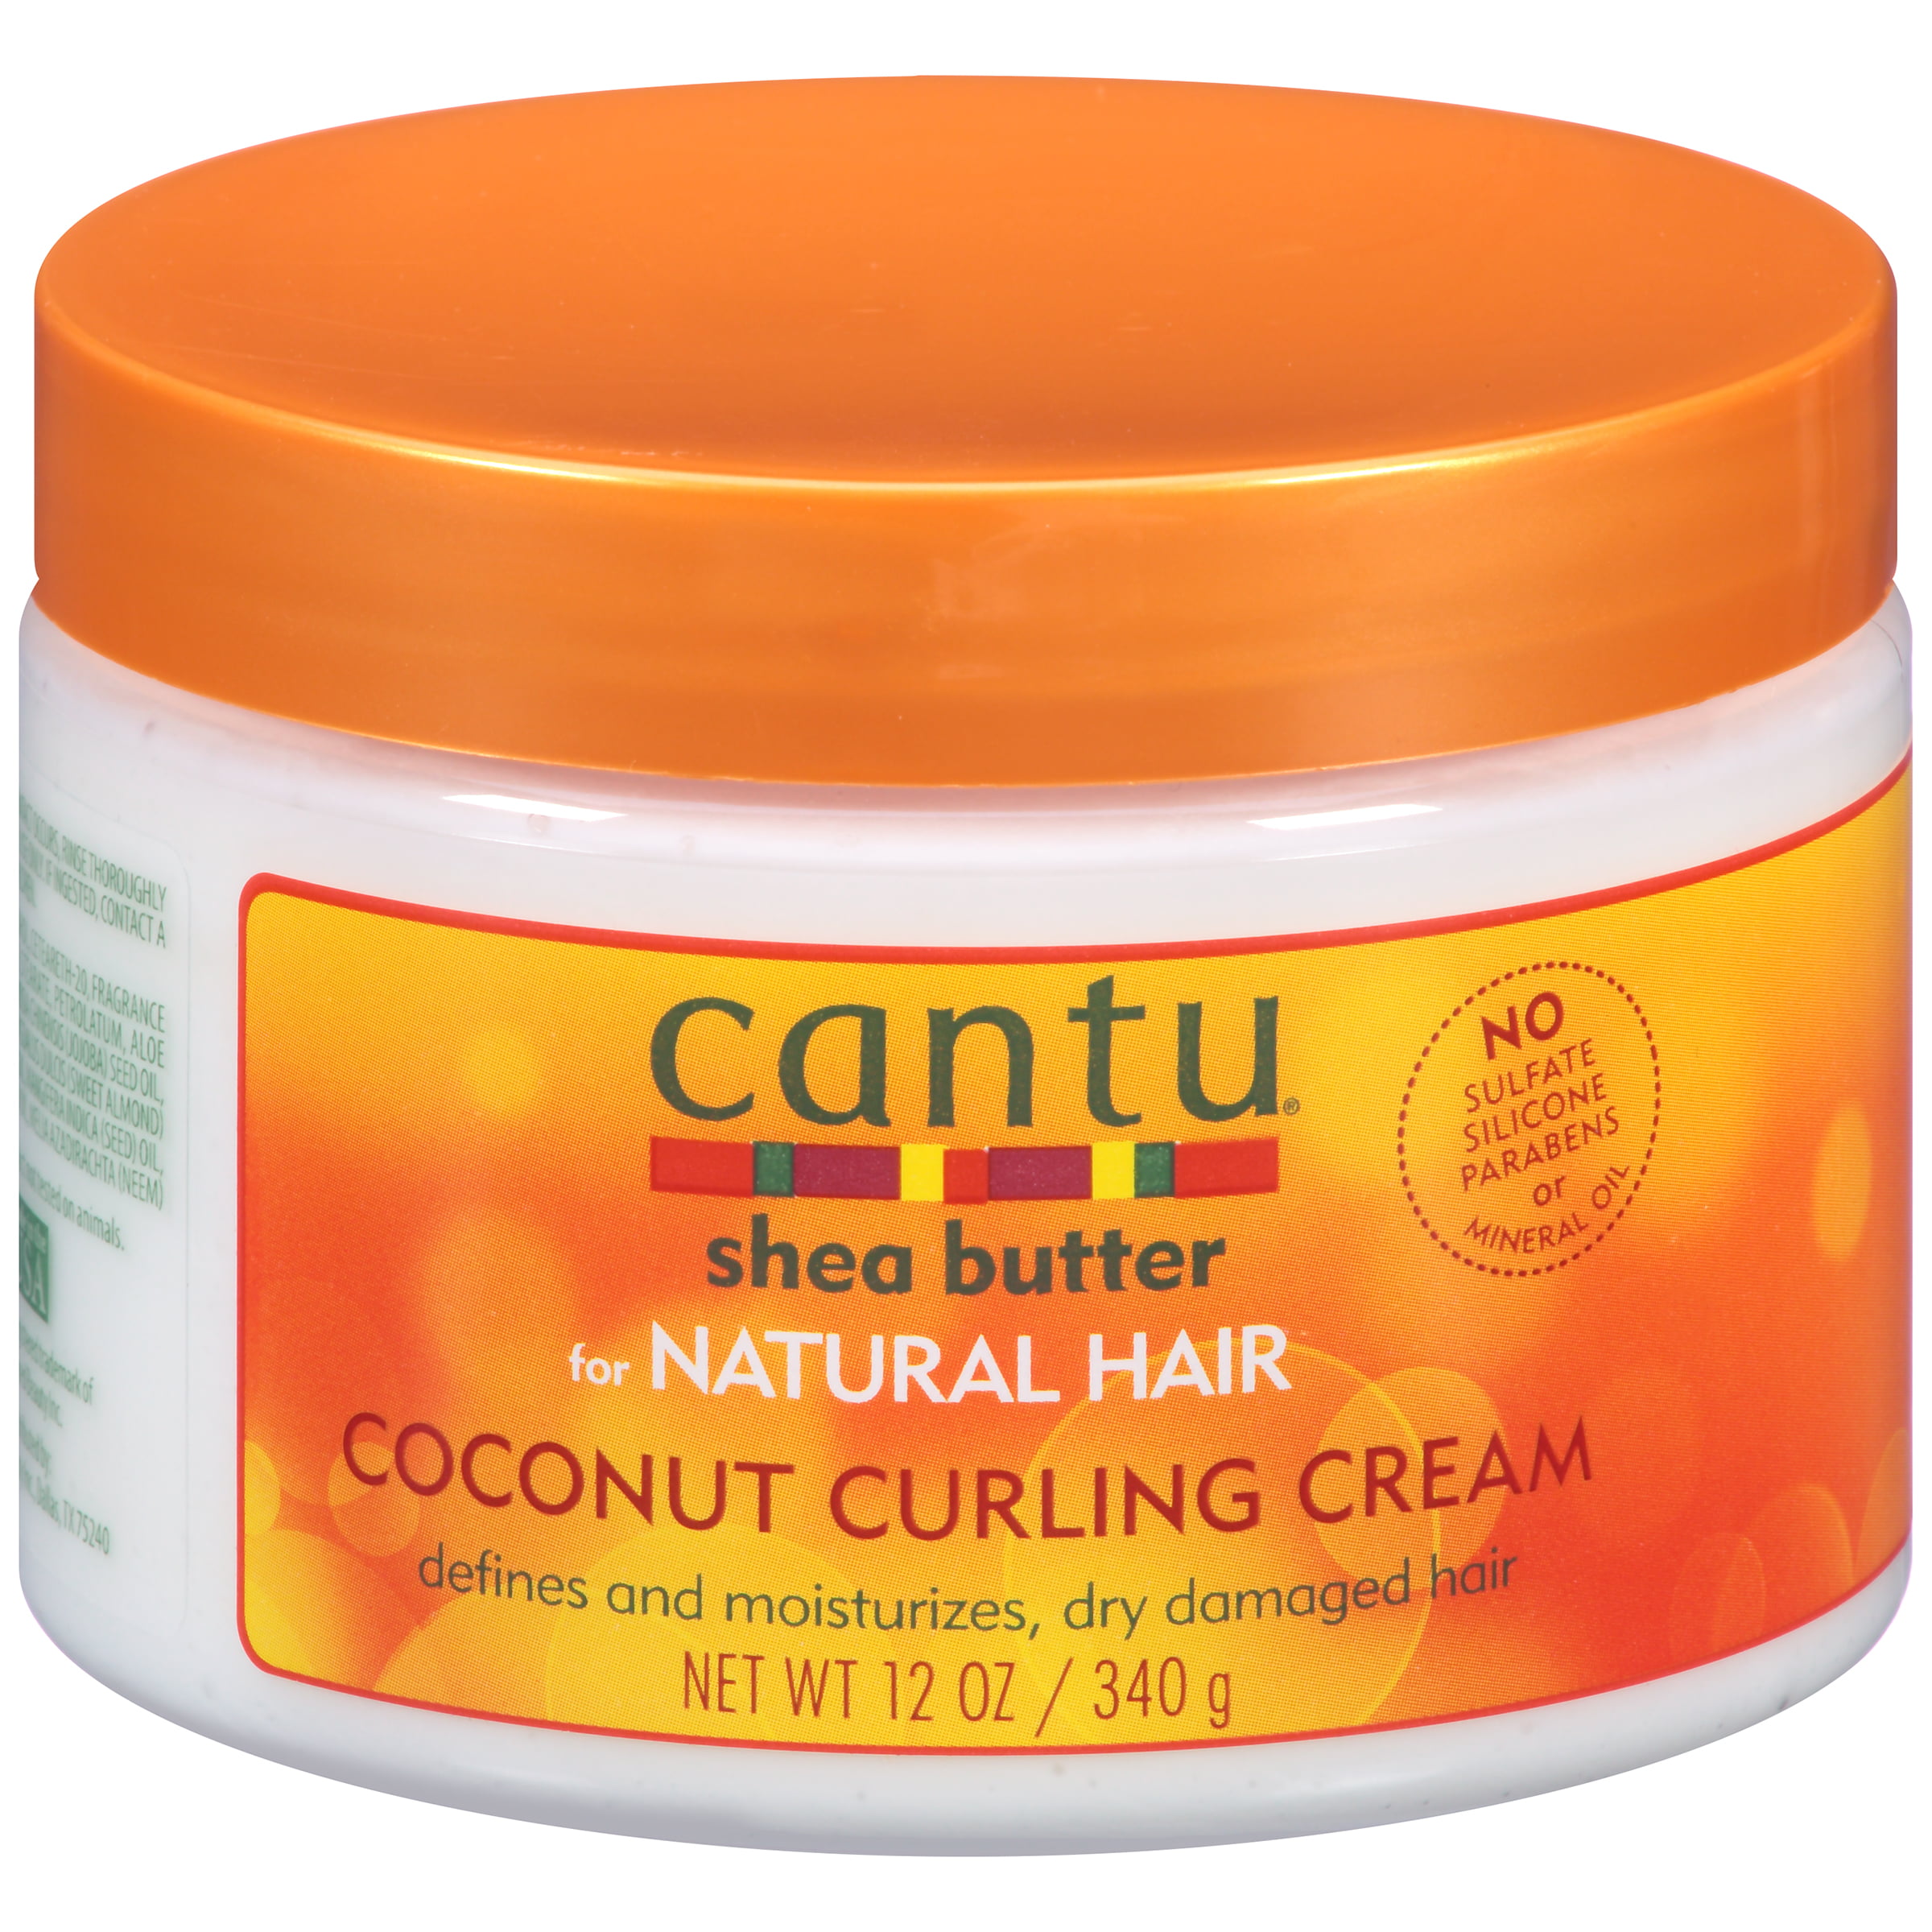 Image result for curling creme for natural hair